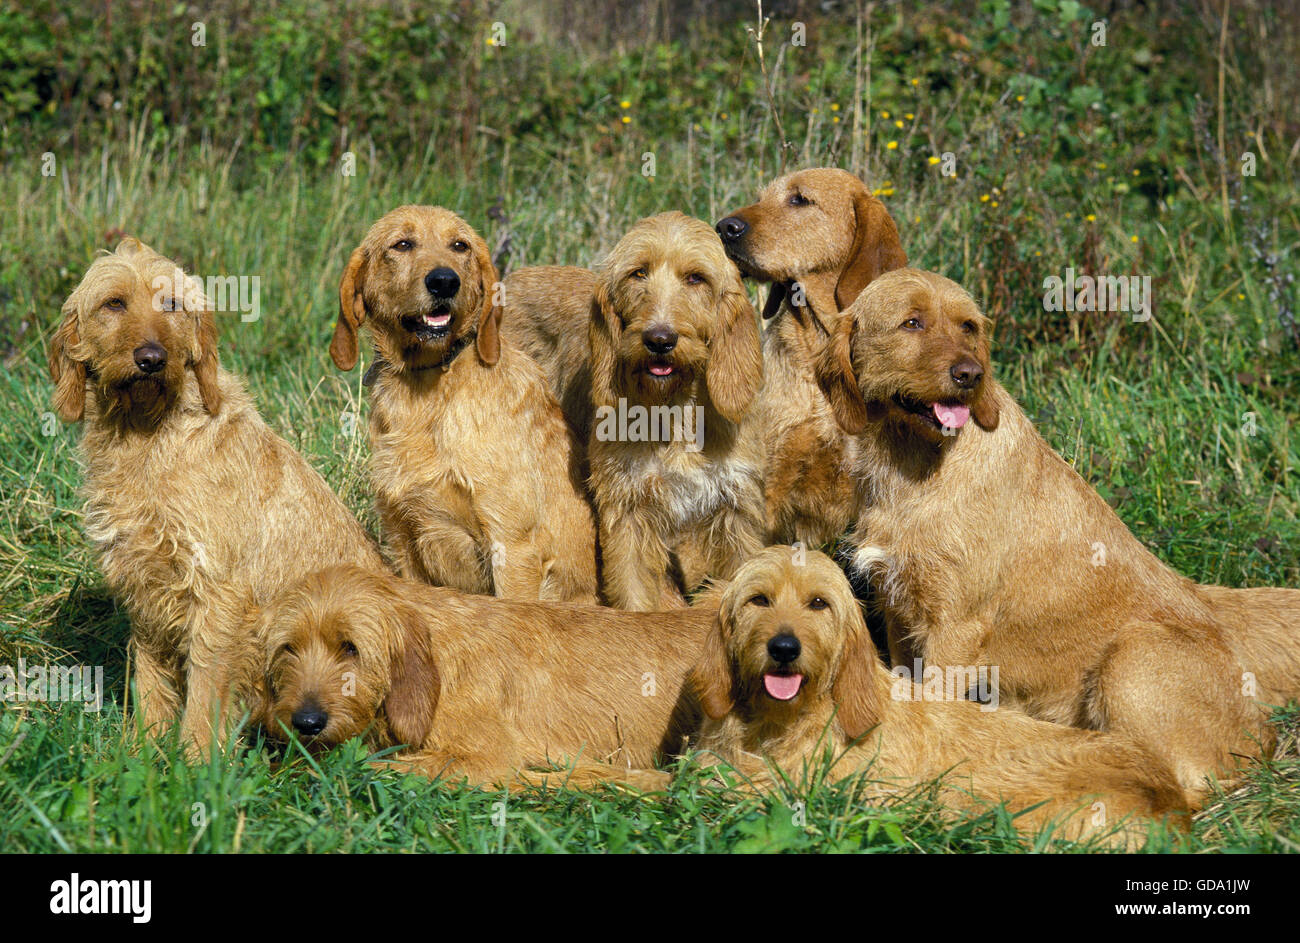 FAWN BRITTANY GRIFFON OR GRIFFON FAUVE DE BRETAGNE DOG, PACK OF ADULTS Stock Photo